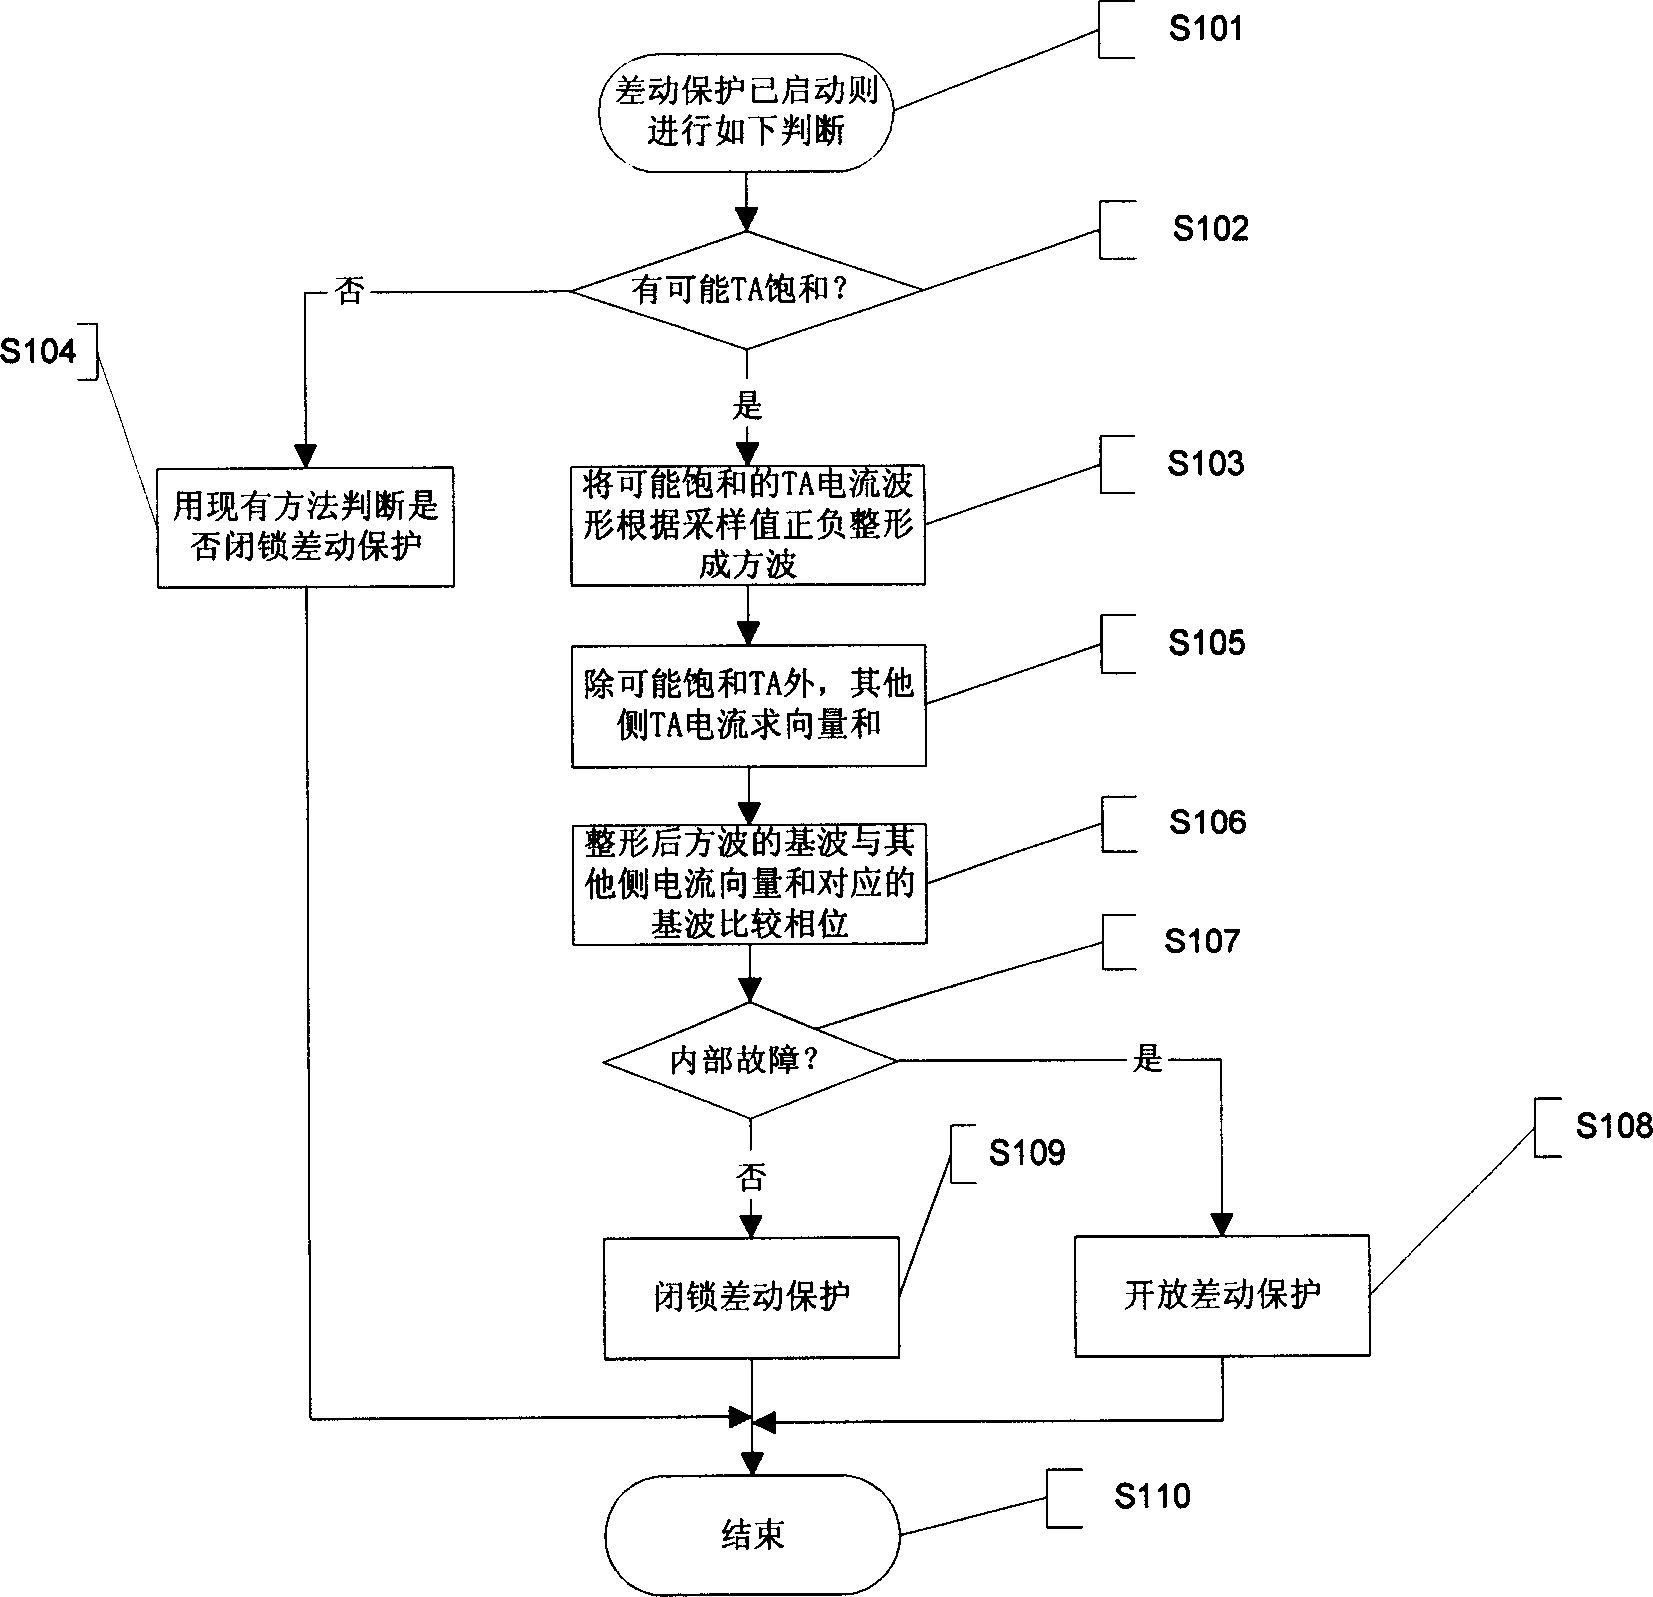 Method for different protection using wave-shaping method